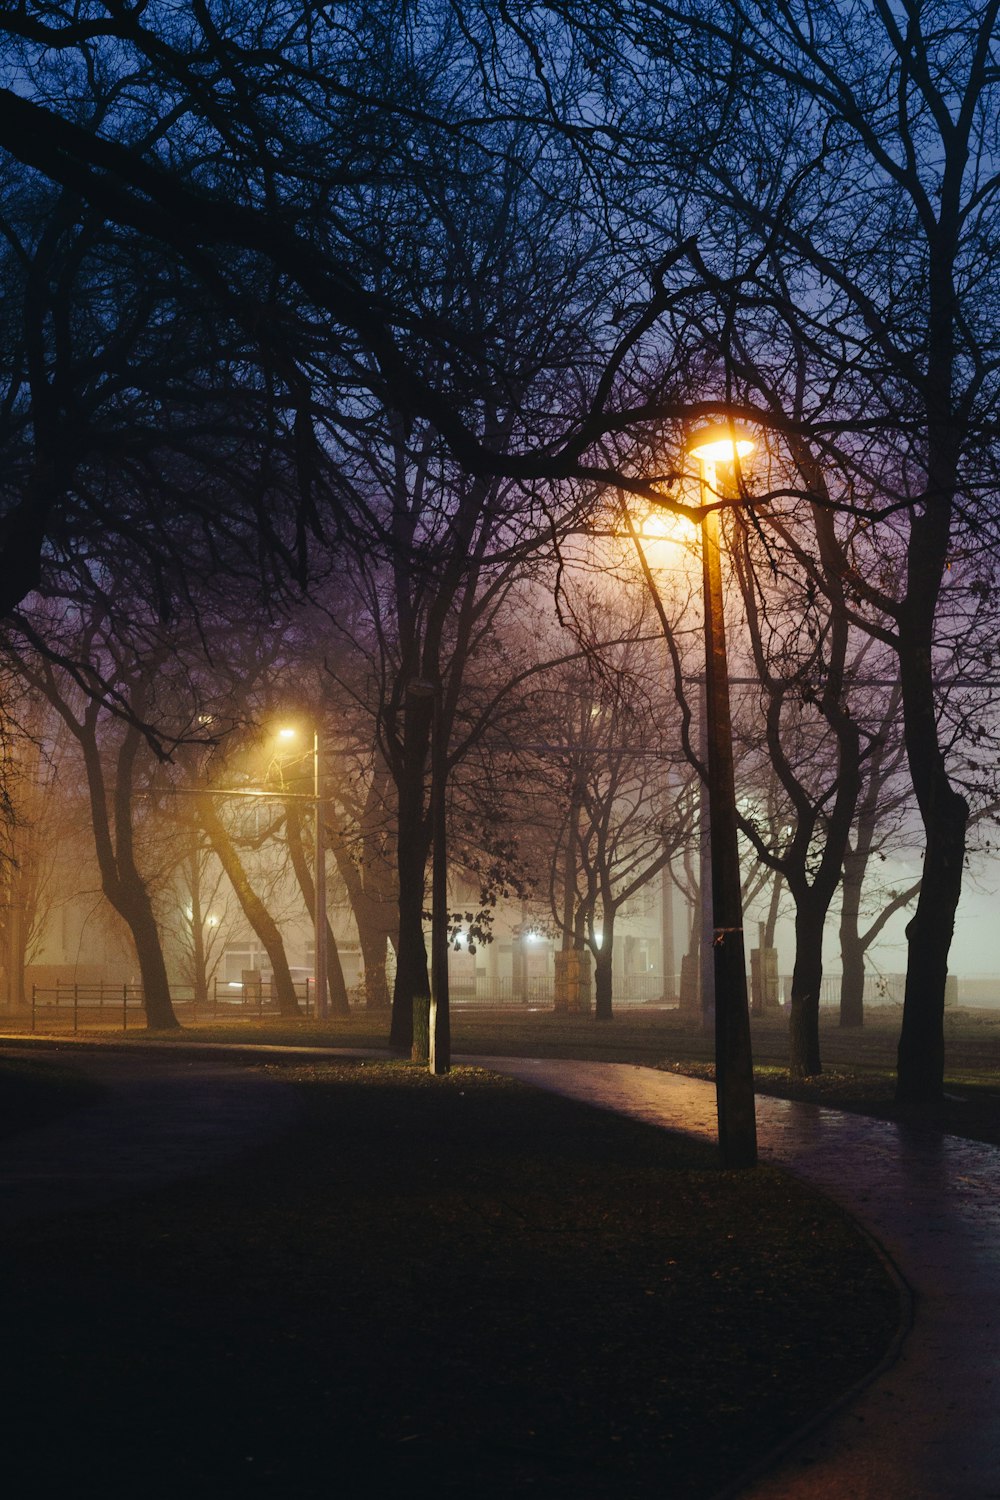 a foggy night in a park with trees and street lights